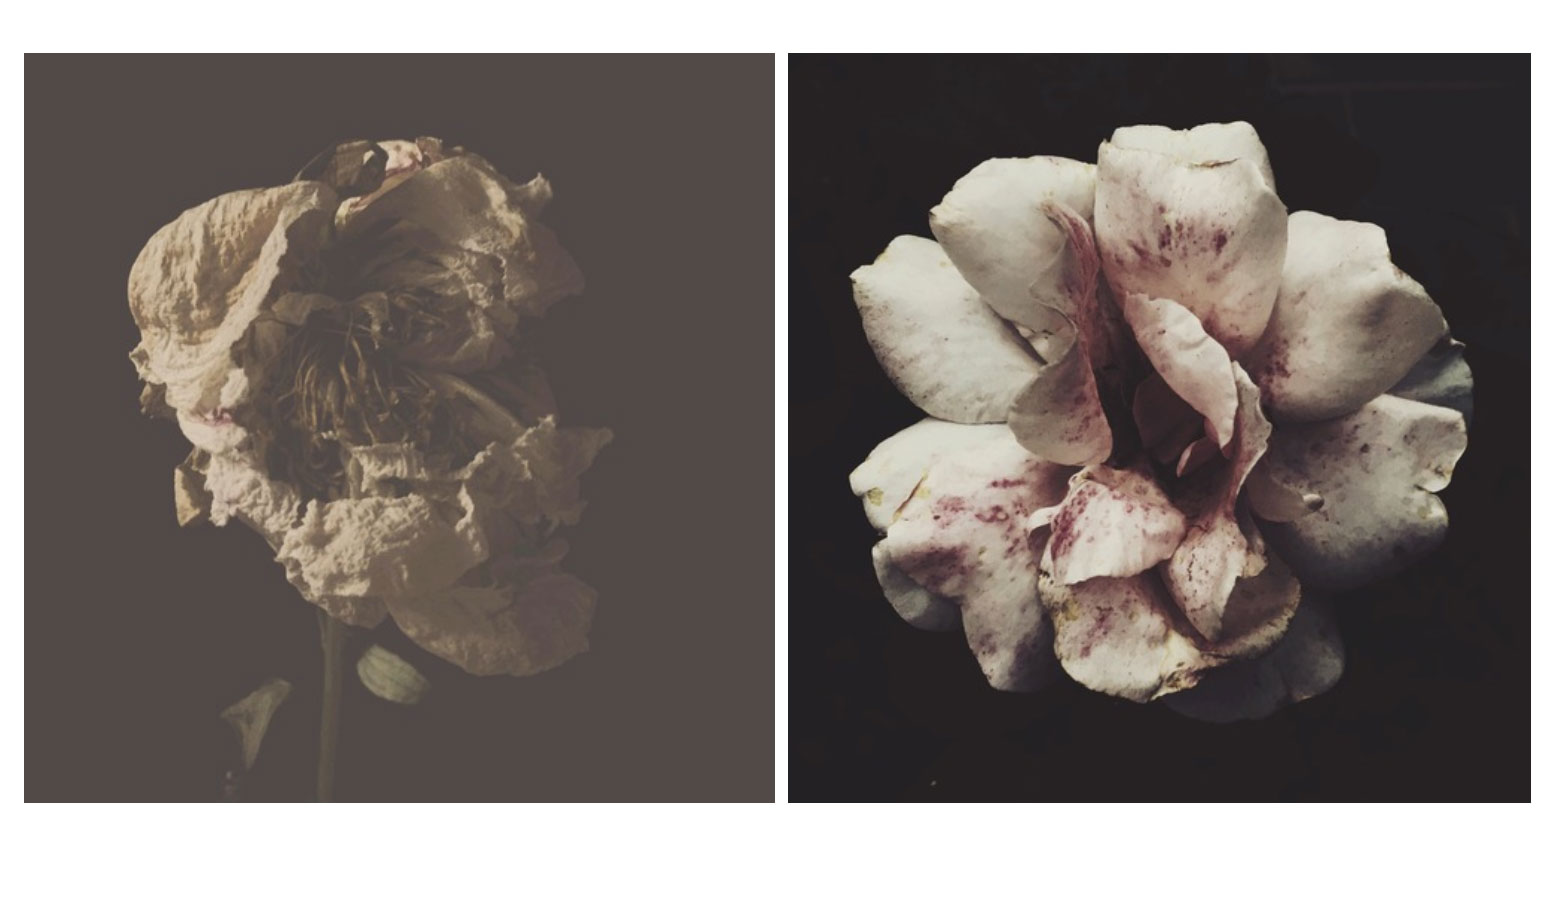 flower photographs, prints, ashley woodson bailey, black and white, dead flowers, featured image